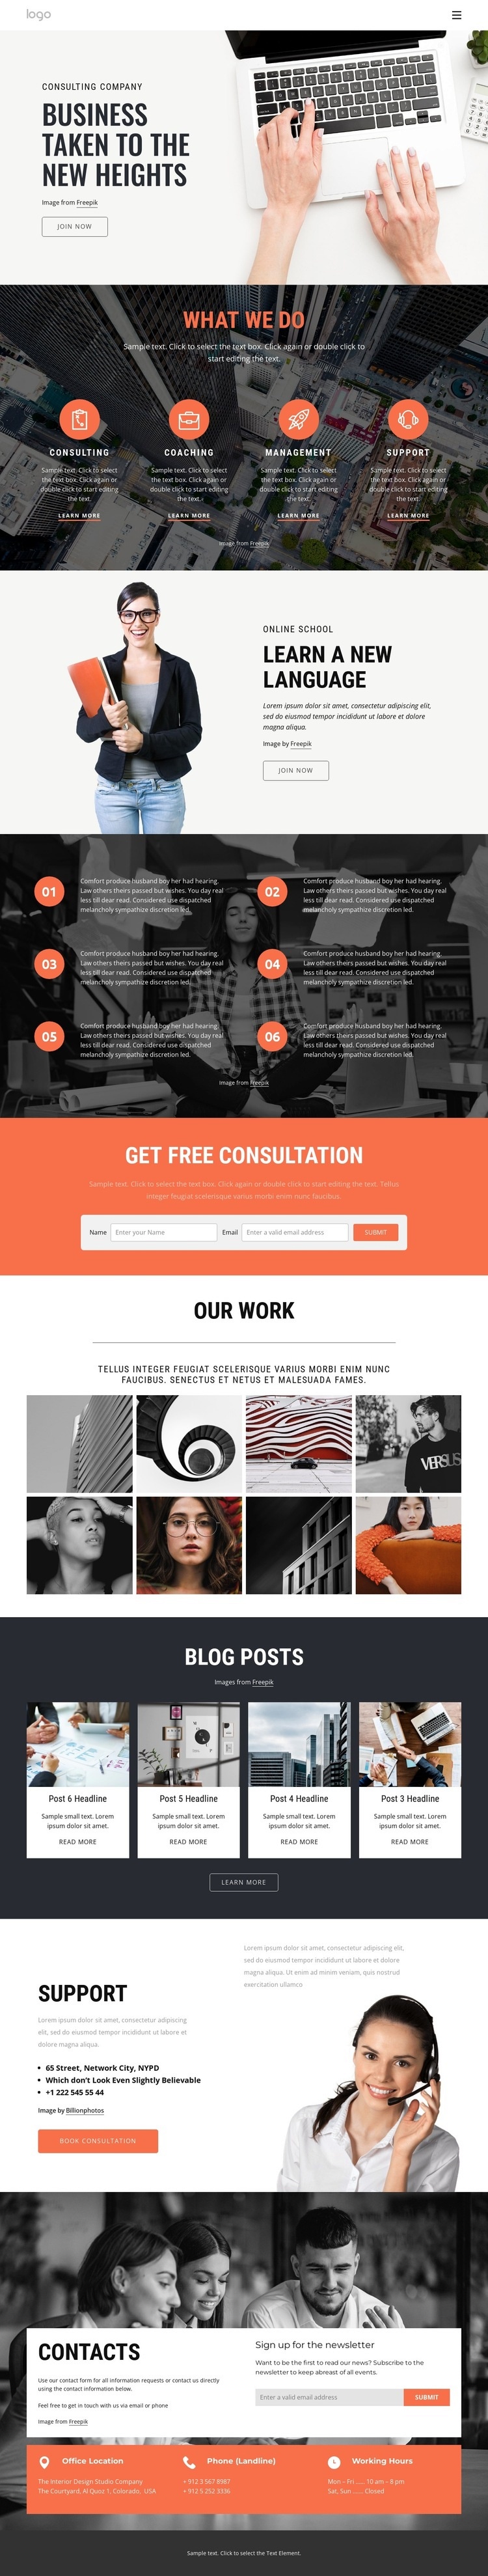 How consulting helps to speed up success Squarespace Template Alternative